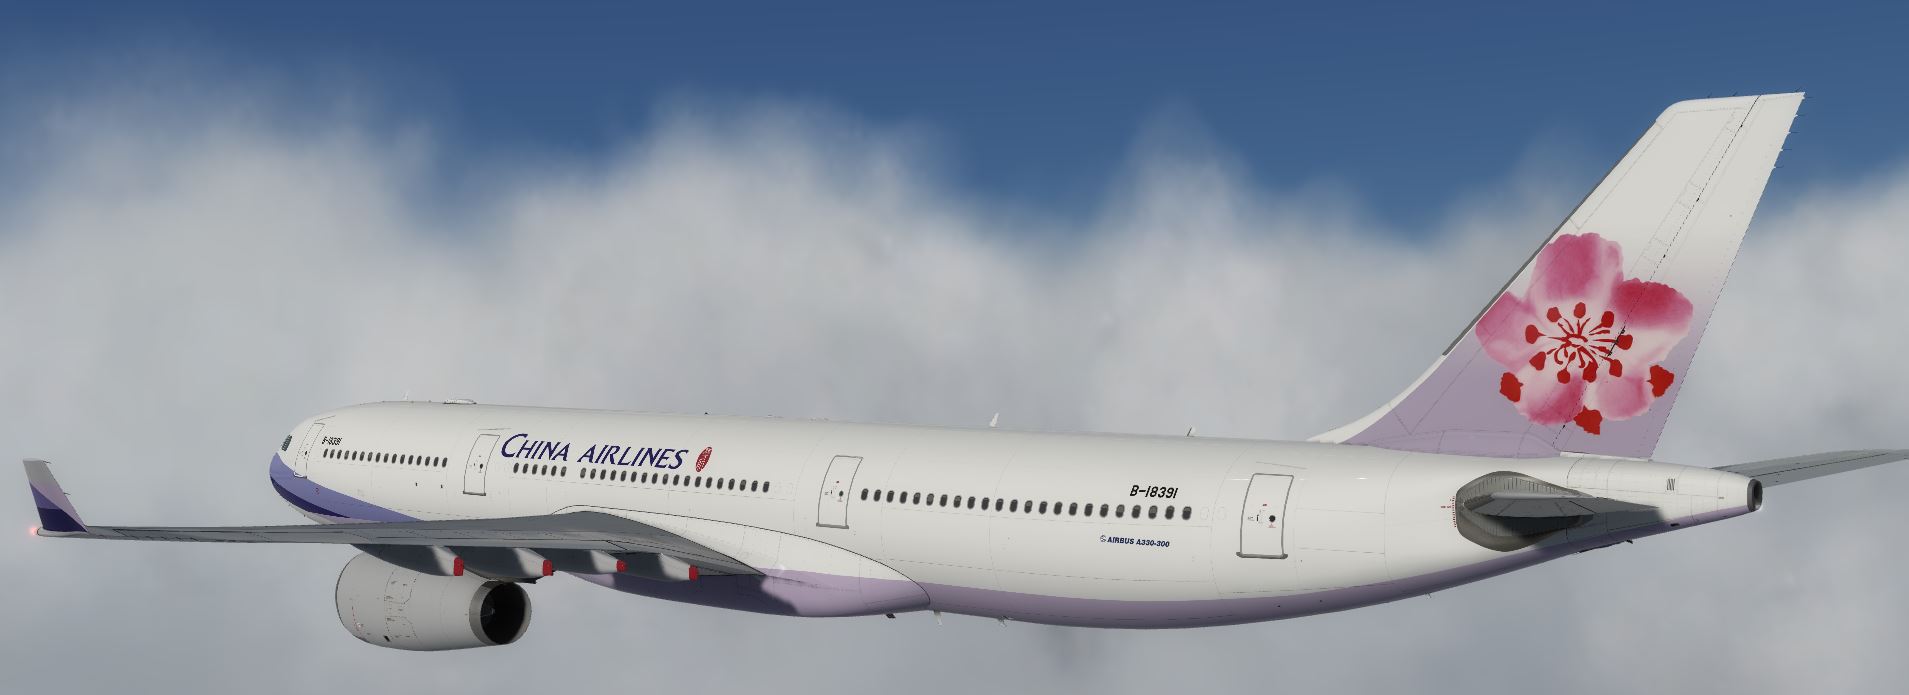 AS A330 ChinaAirline-5977 